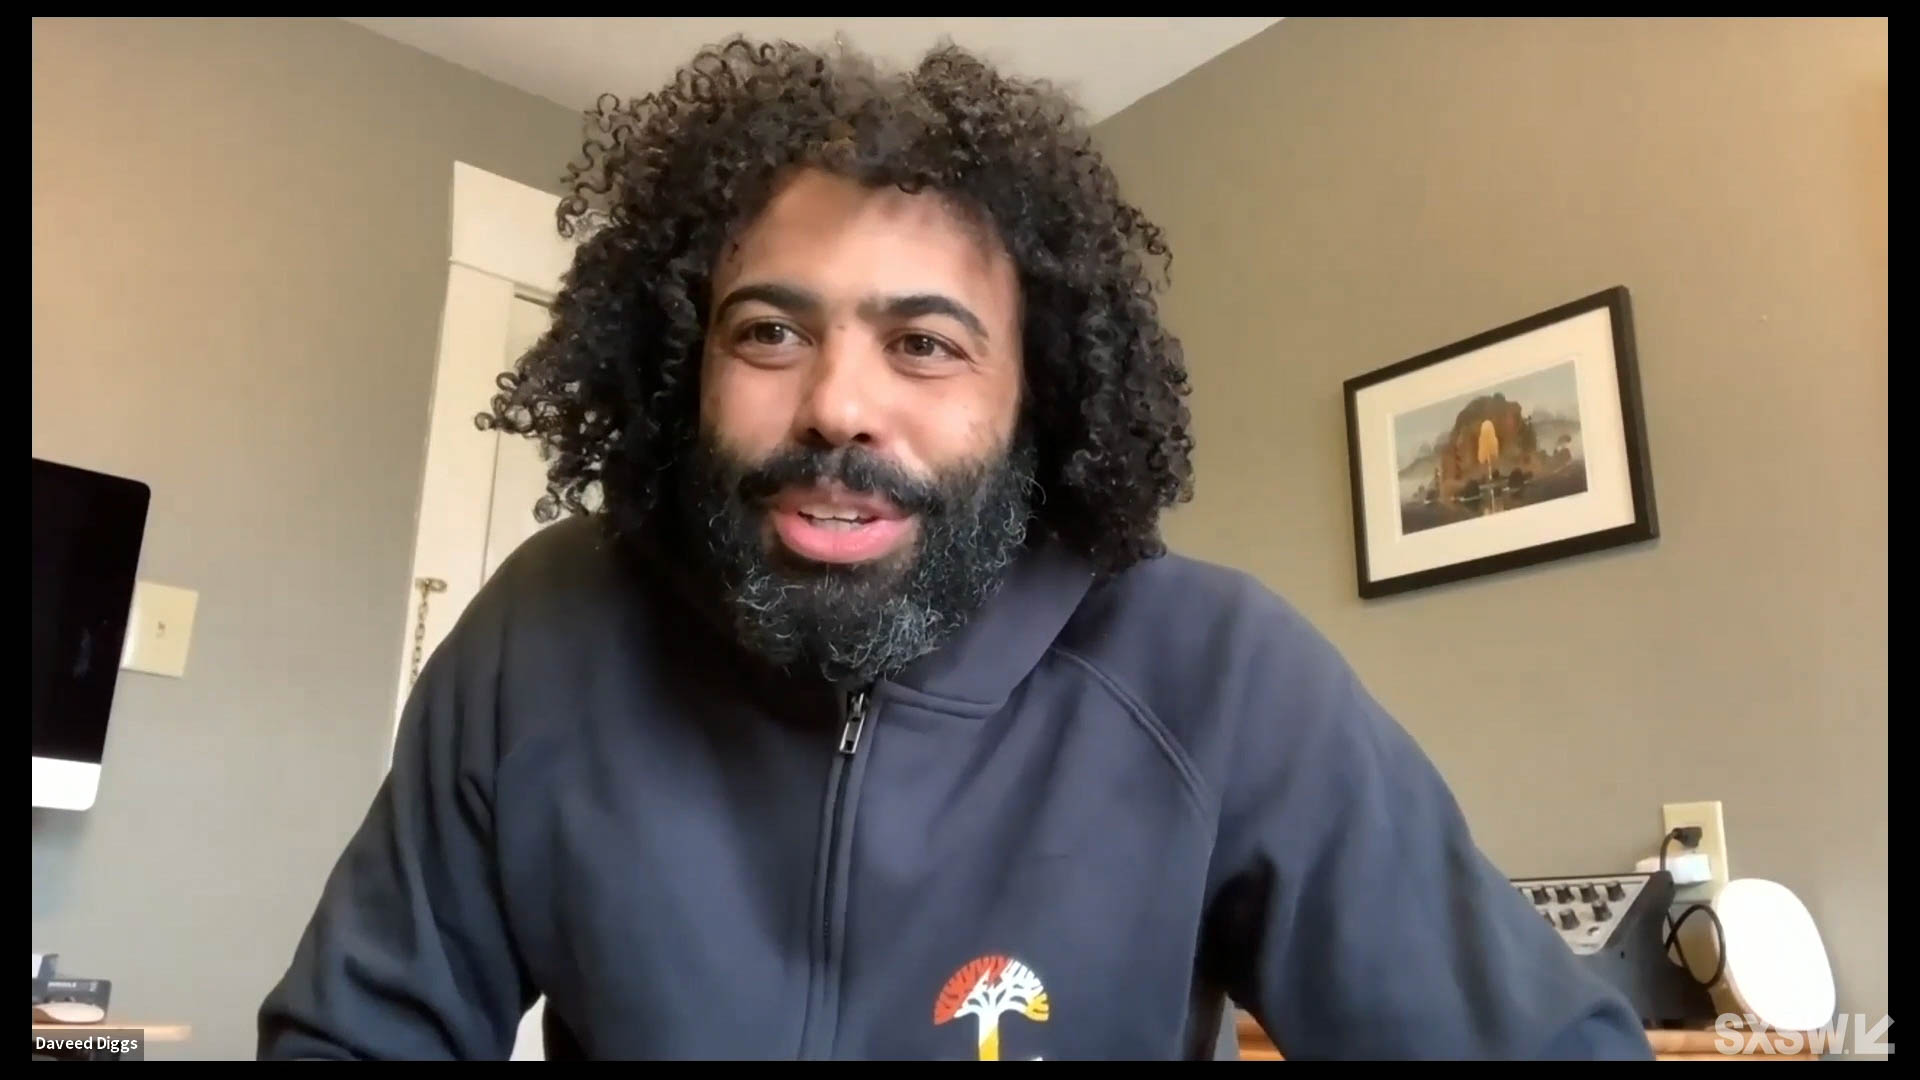 Daveed Diggs answers questions at the SXSW Film Festival Premiere of "Incorporating Choreography and Verse Into Blindspotting" during SXSW Online on March 17, 2021.